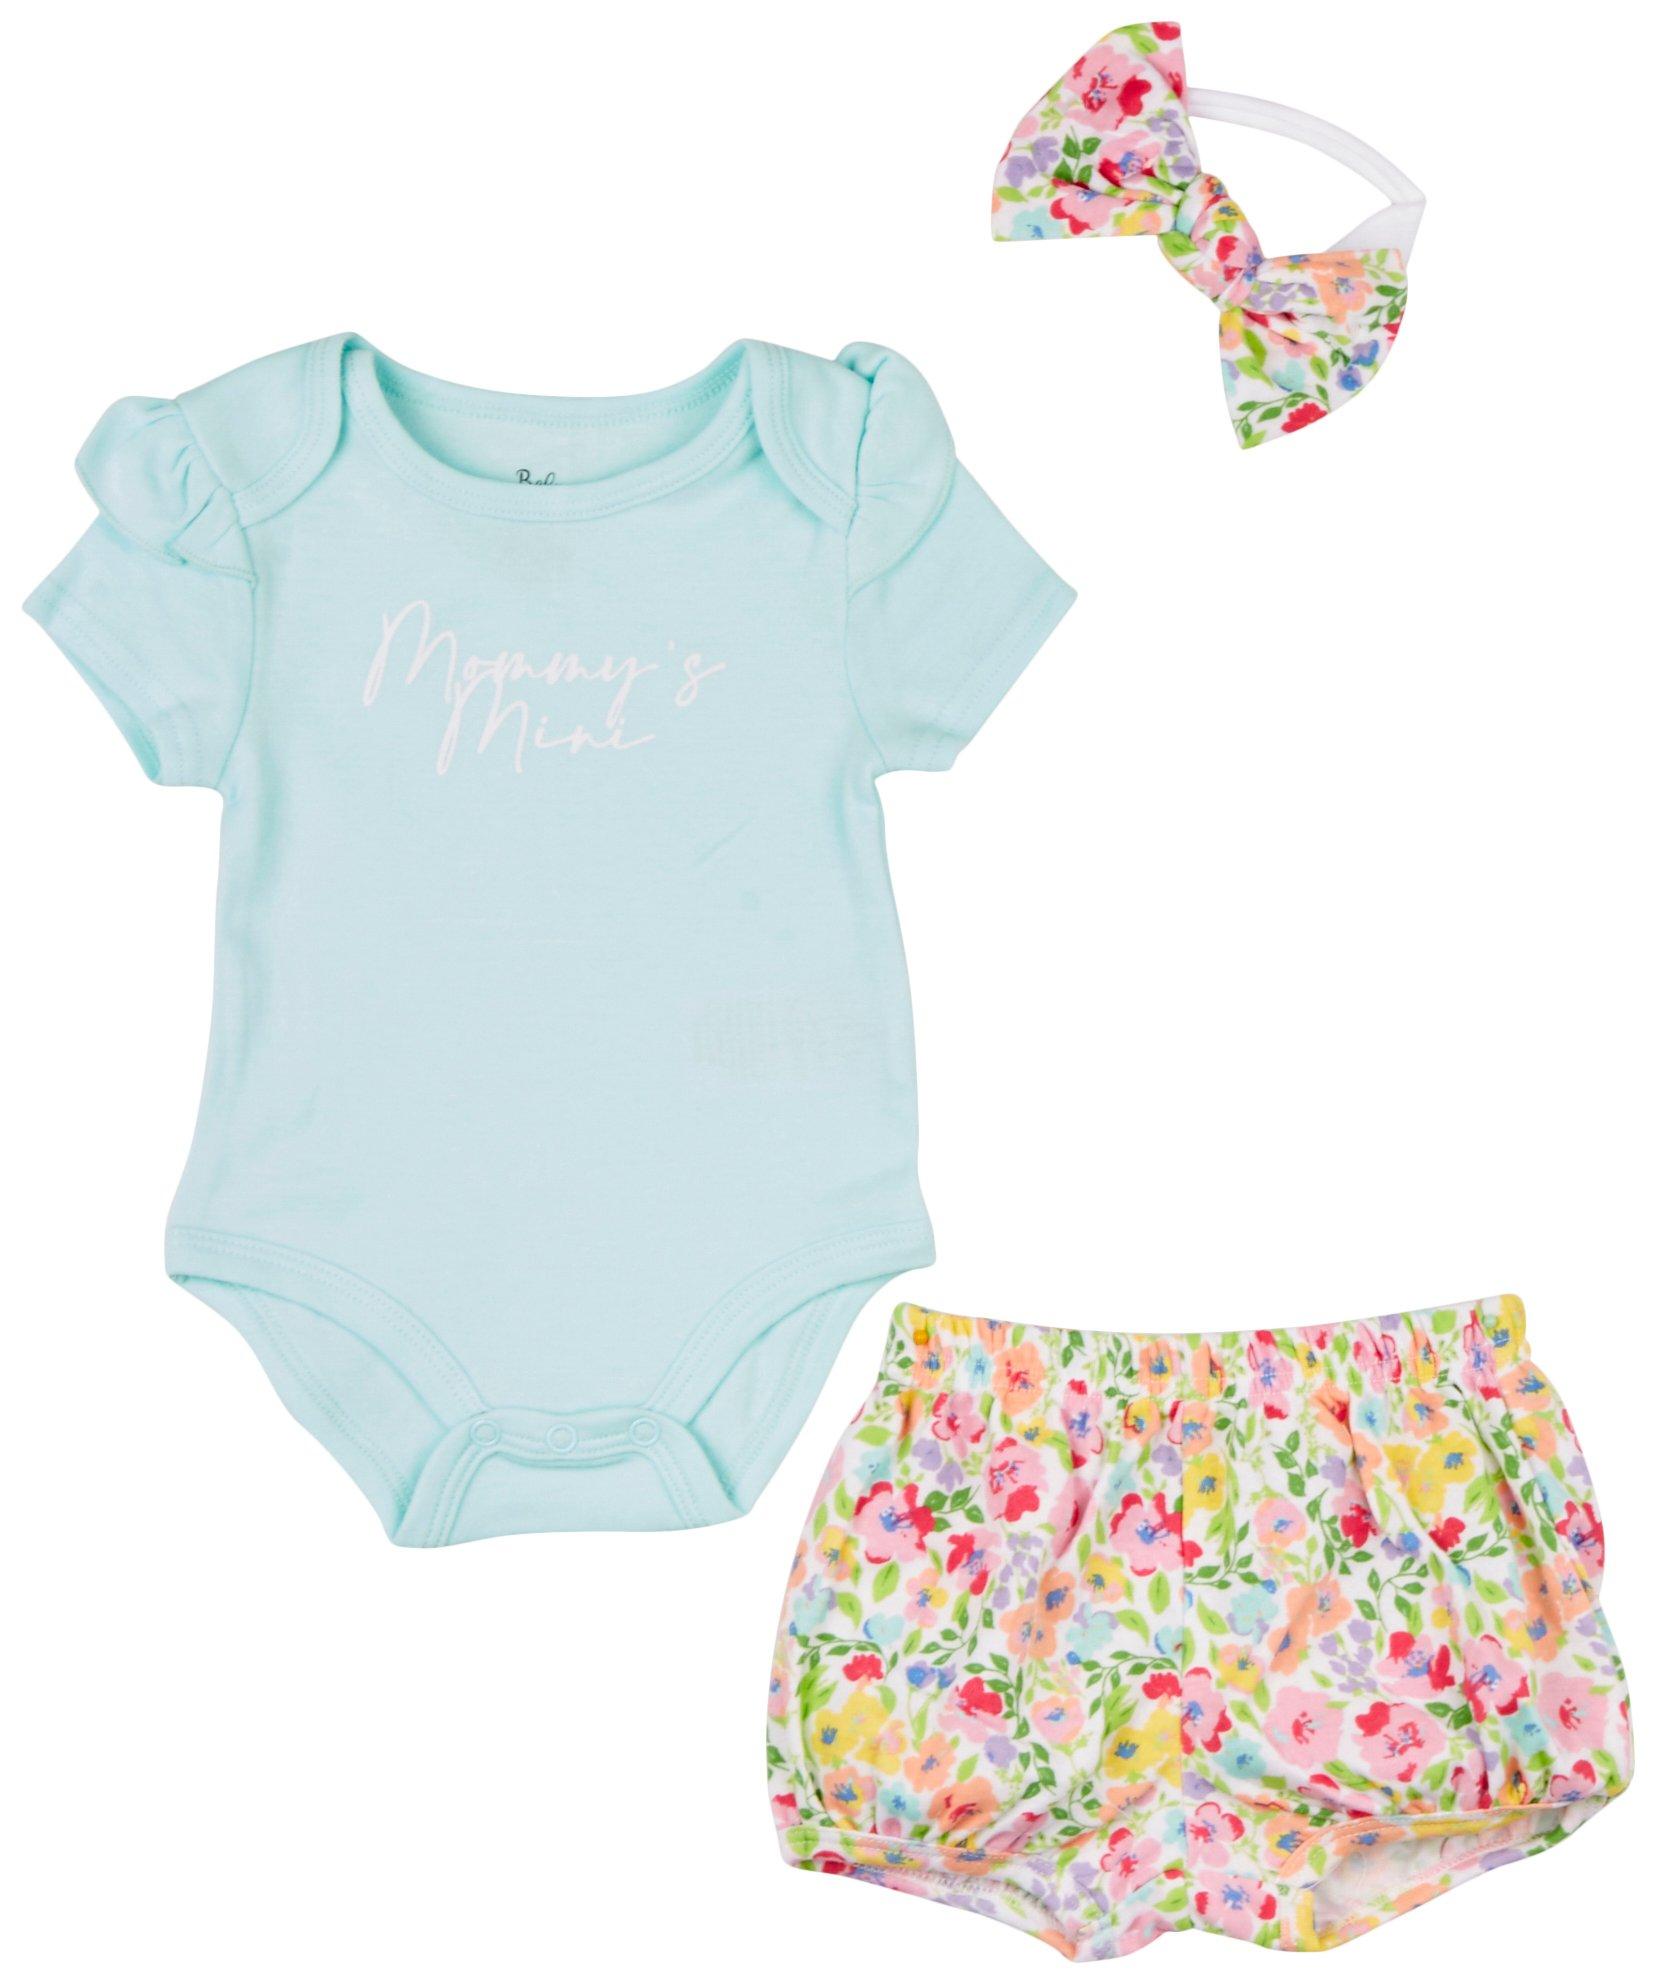 Baby Essentials Baby Girls 3-pc. Creeper and Shorts